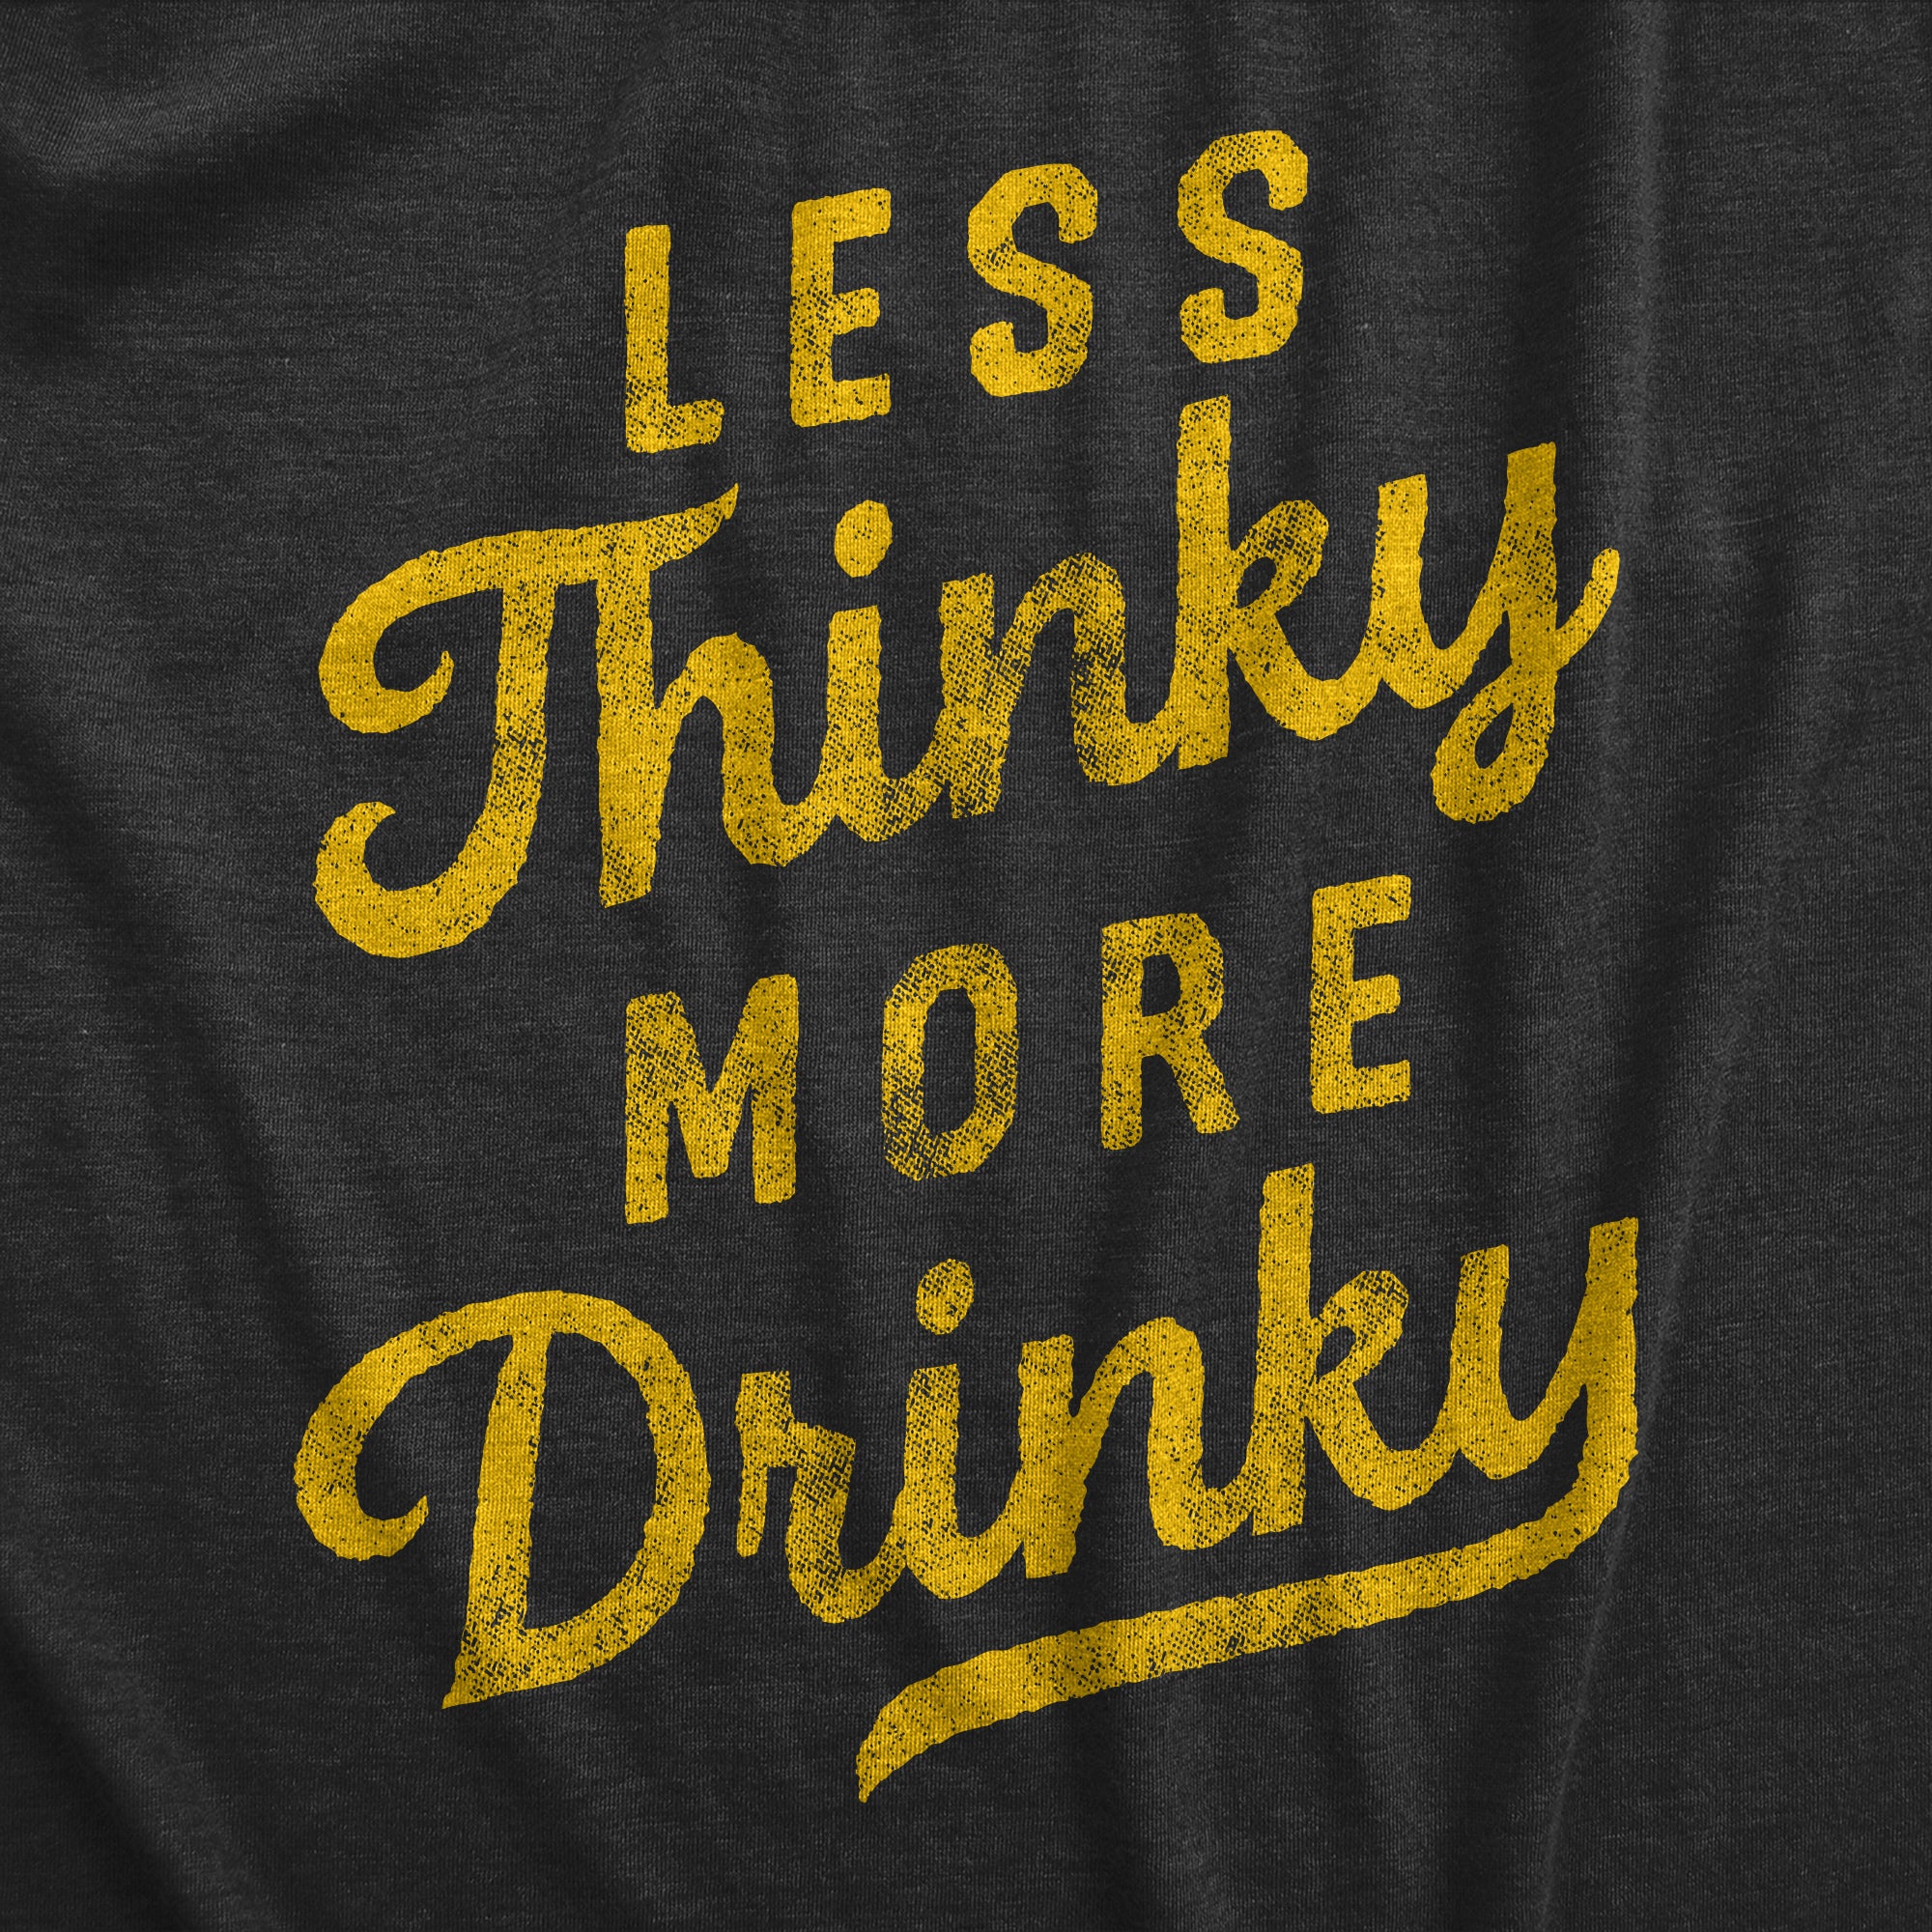 Funny Heather Black Less Thinky More Drinky Mens T Shirt Nerdy drinking Tee